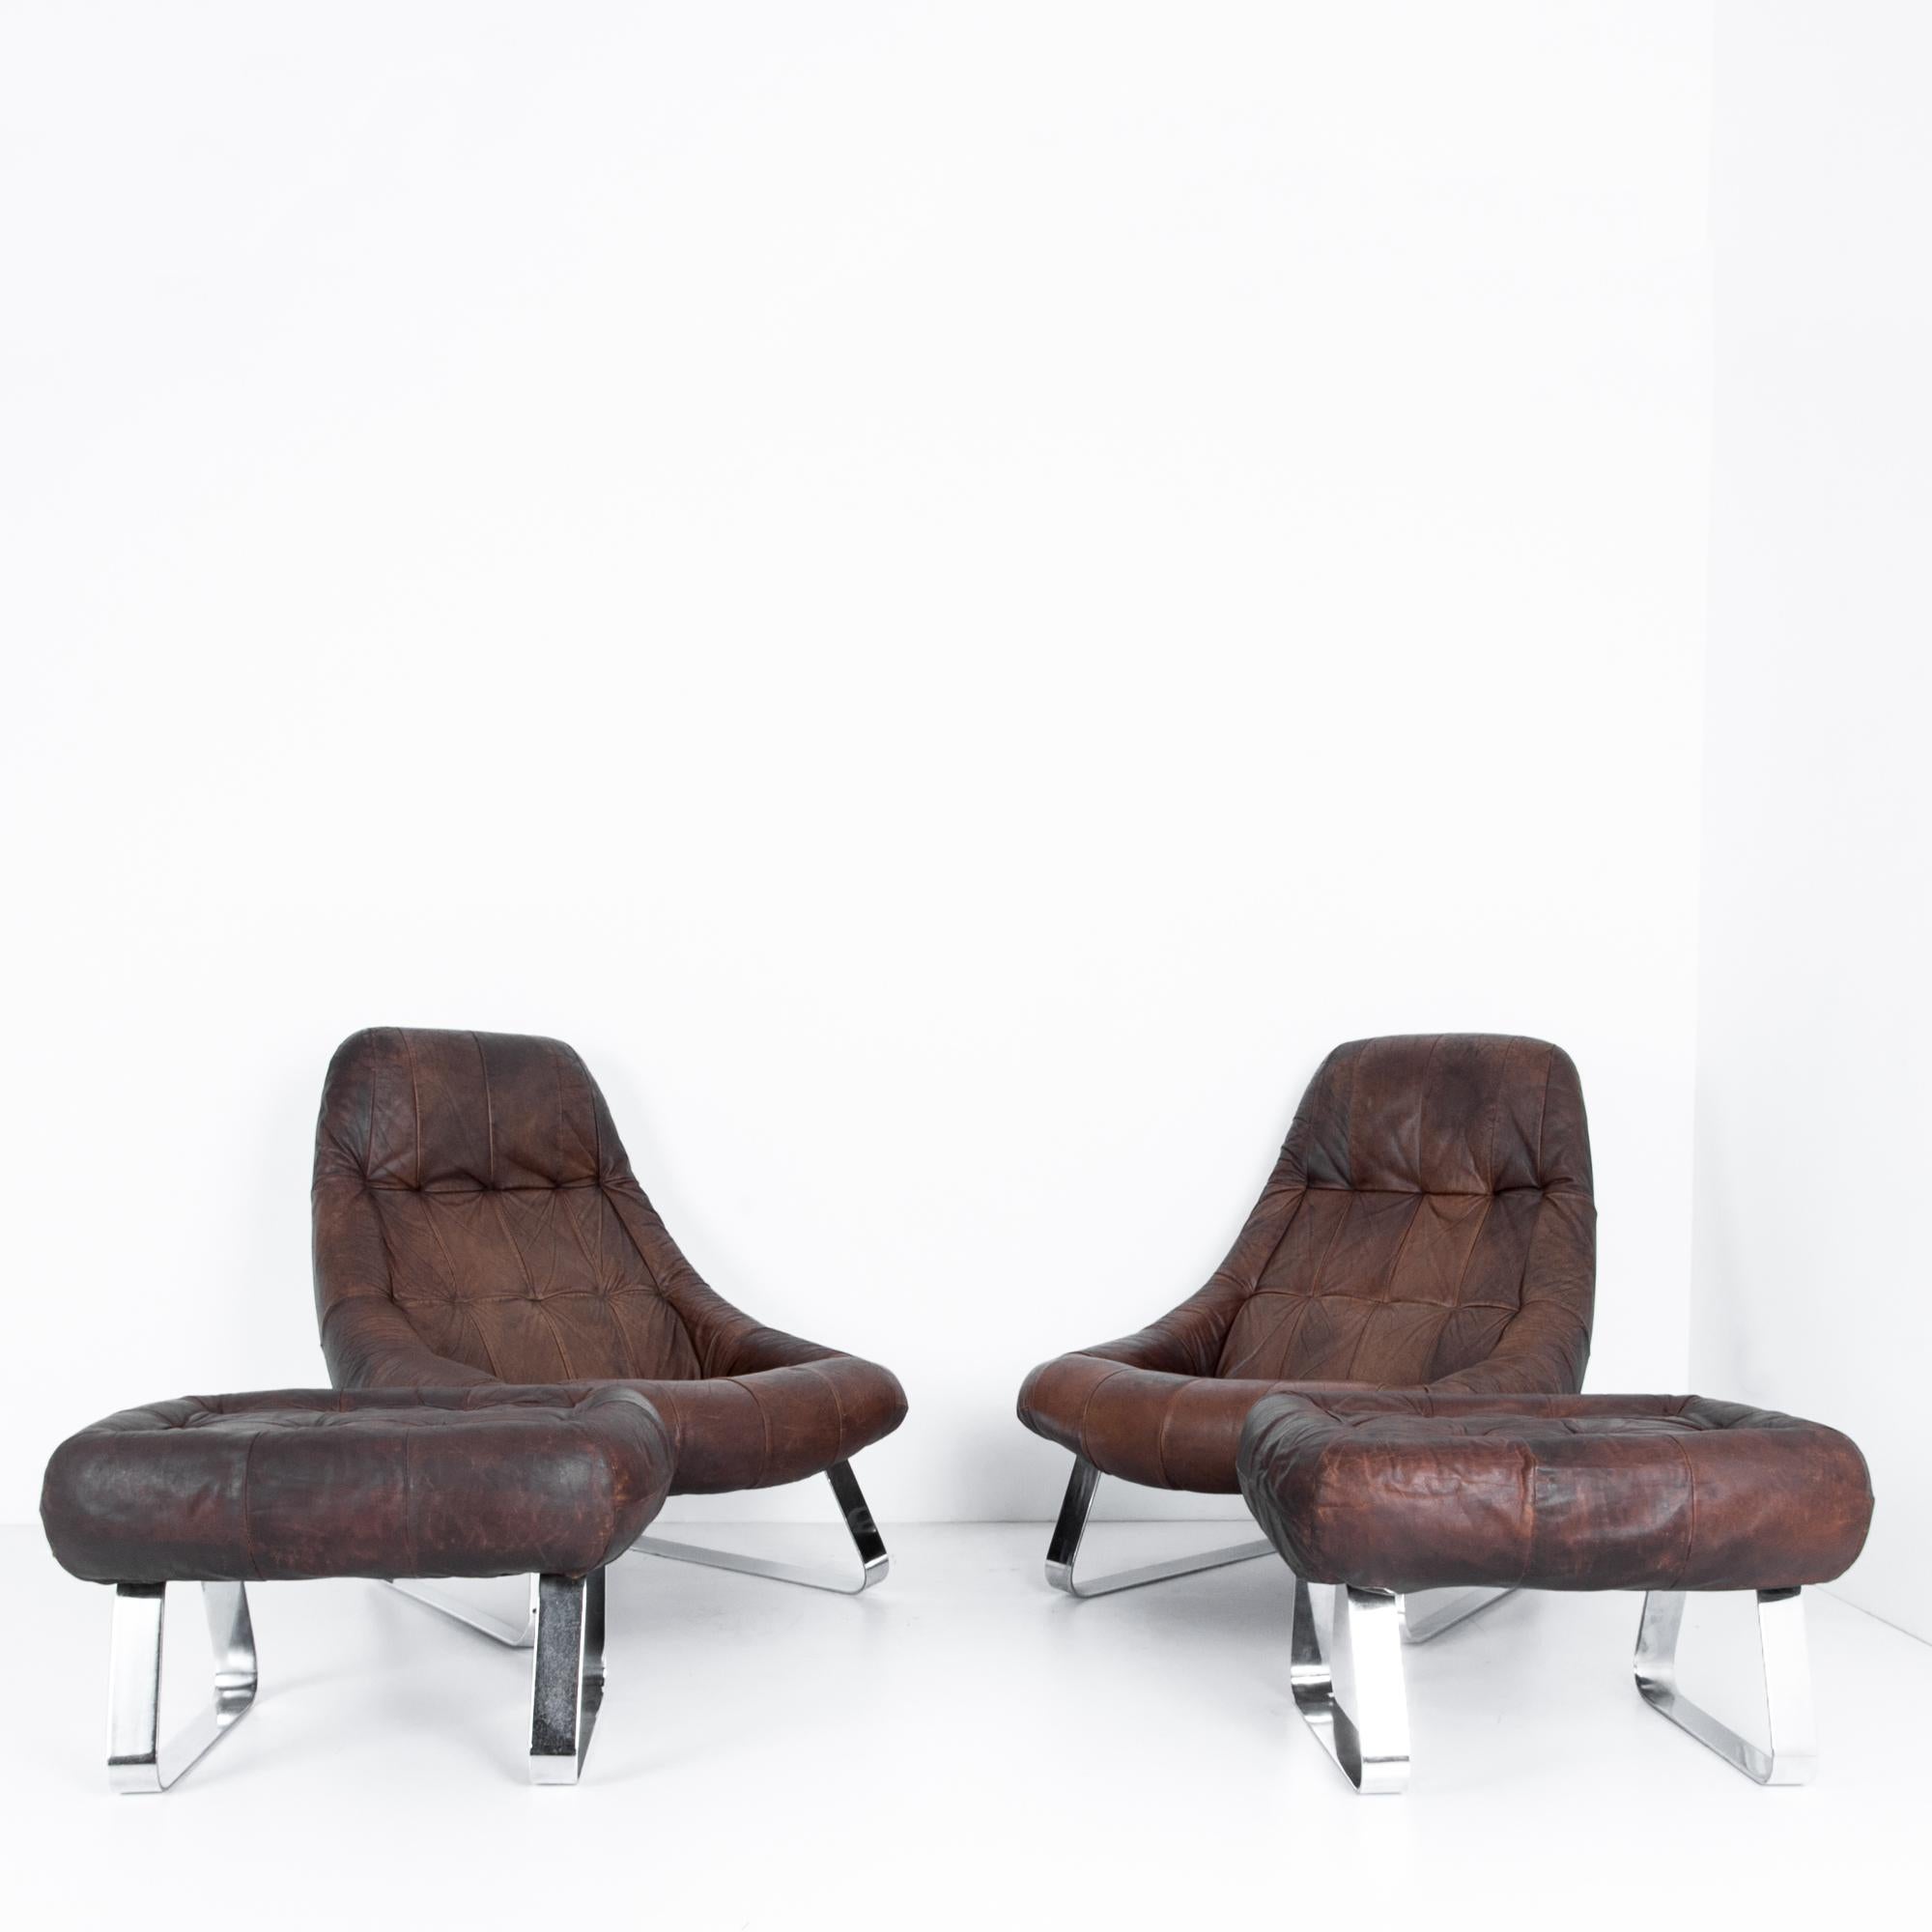 Mid-Century Modern Percival Lafer Dark Brown Chrome Leather Earth Chair with Ottoman, a Pair